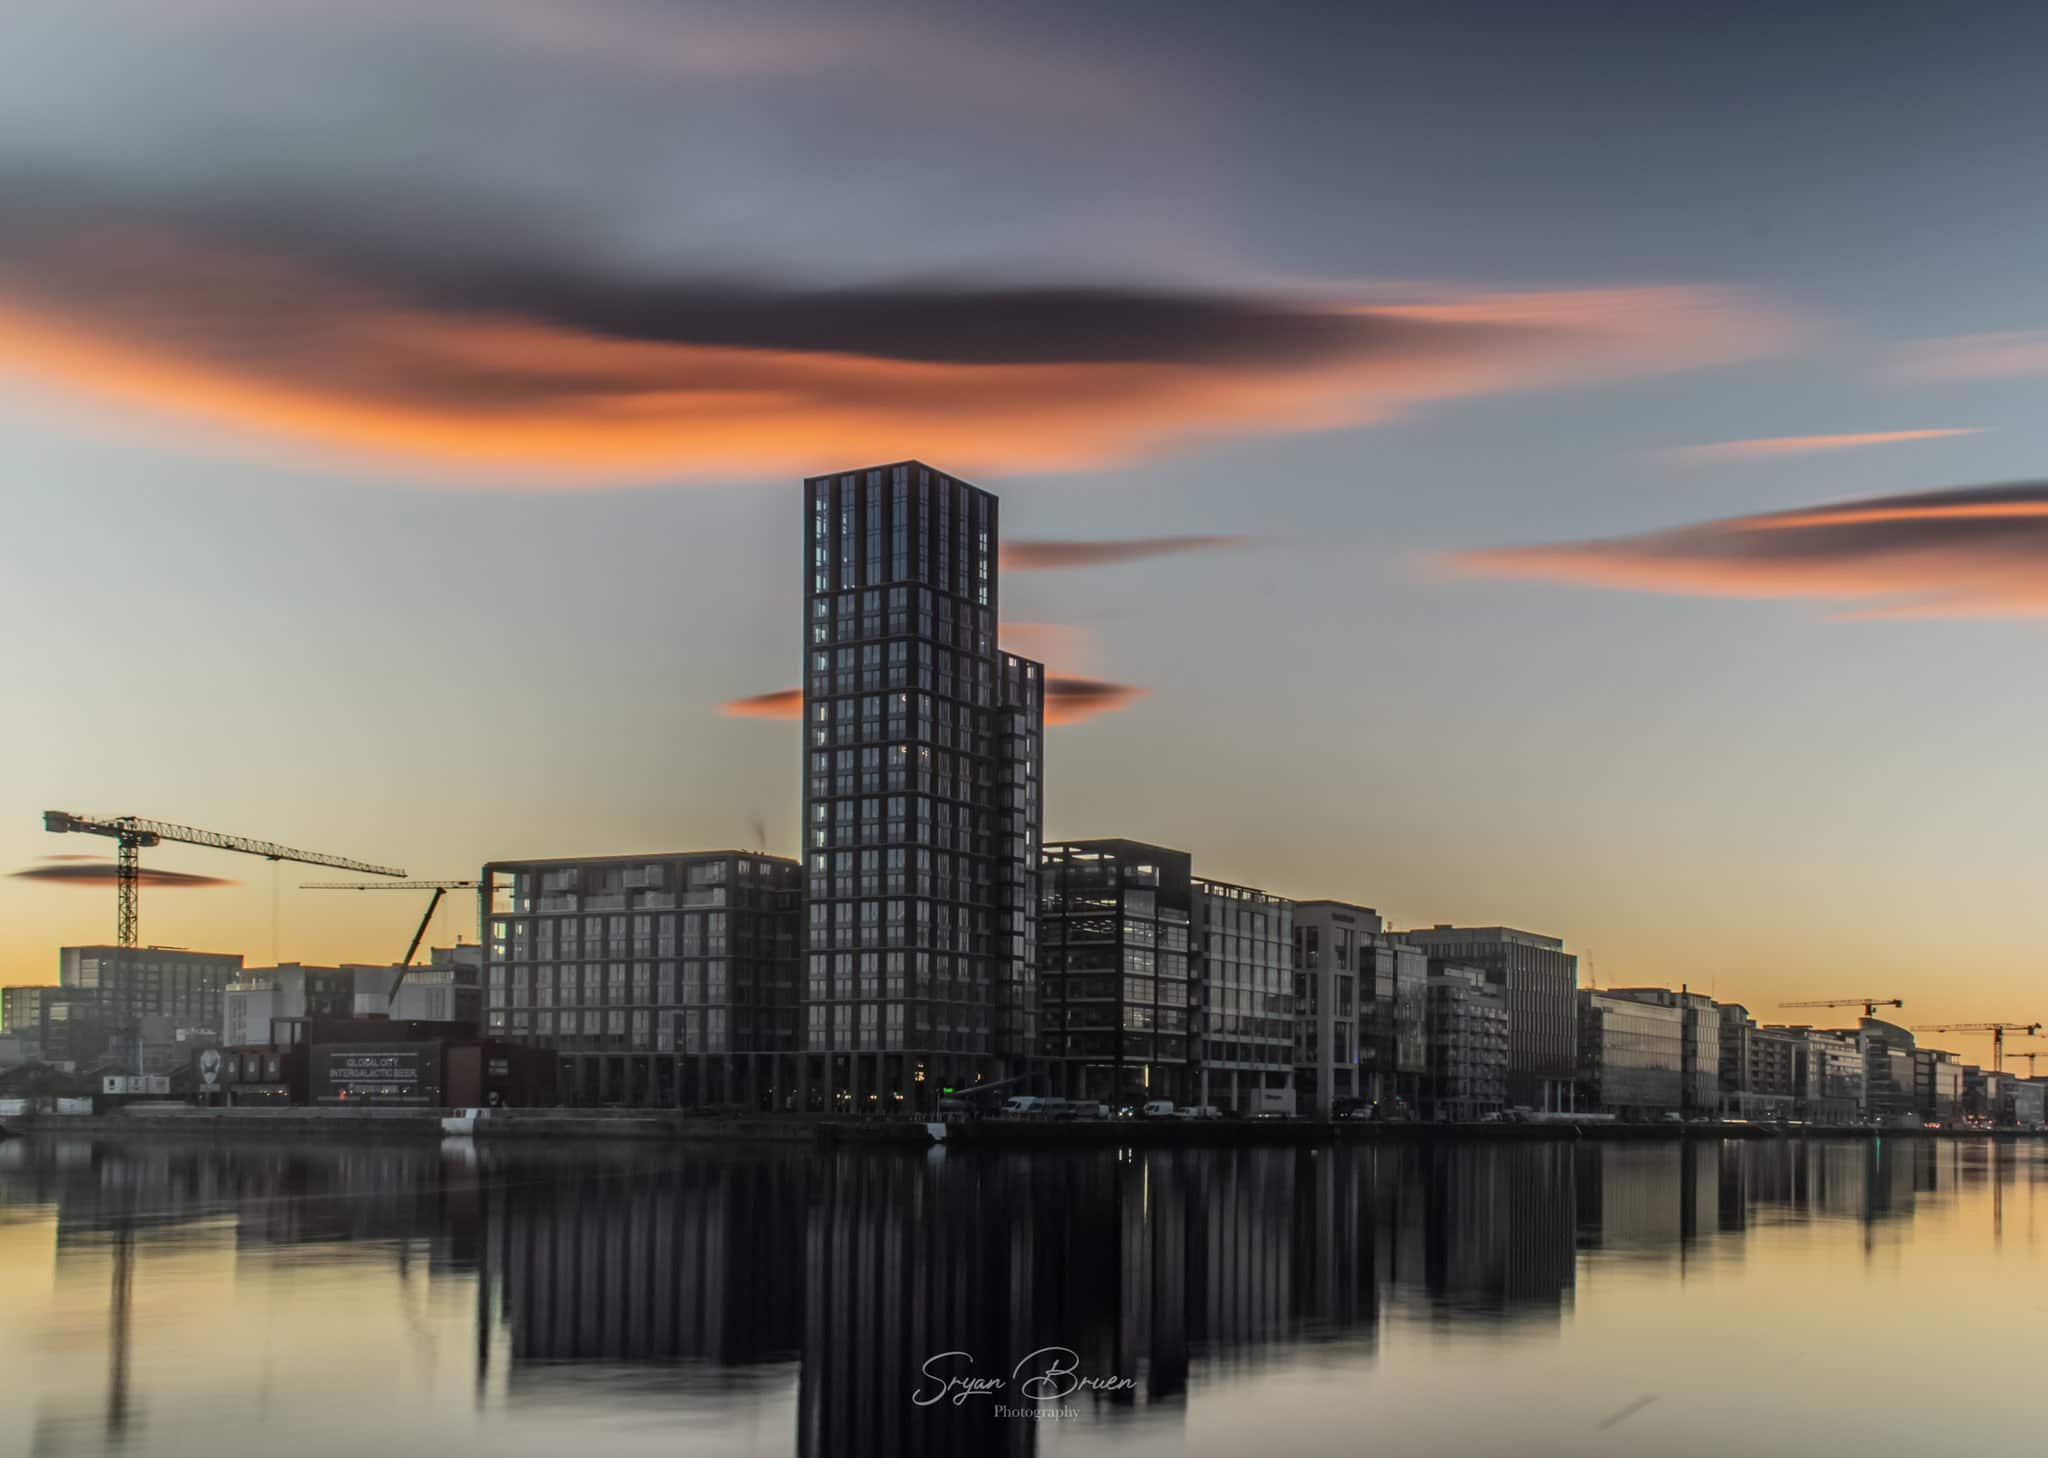 1st Place Red lenticular clouds and a calm sundown in Dublin City by Wx Photography @PhotographyWx